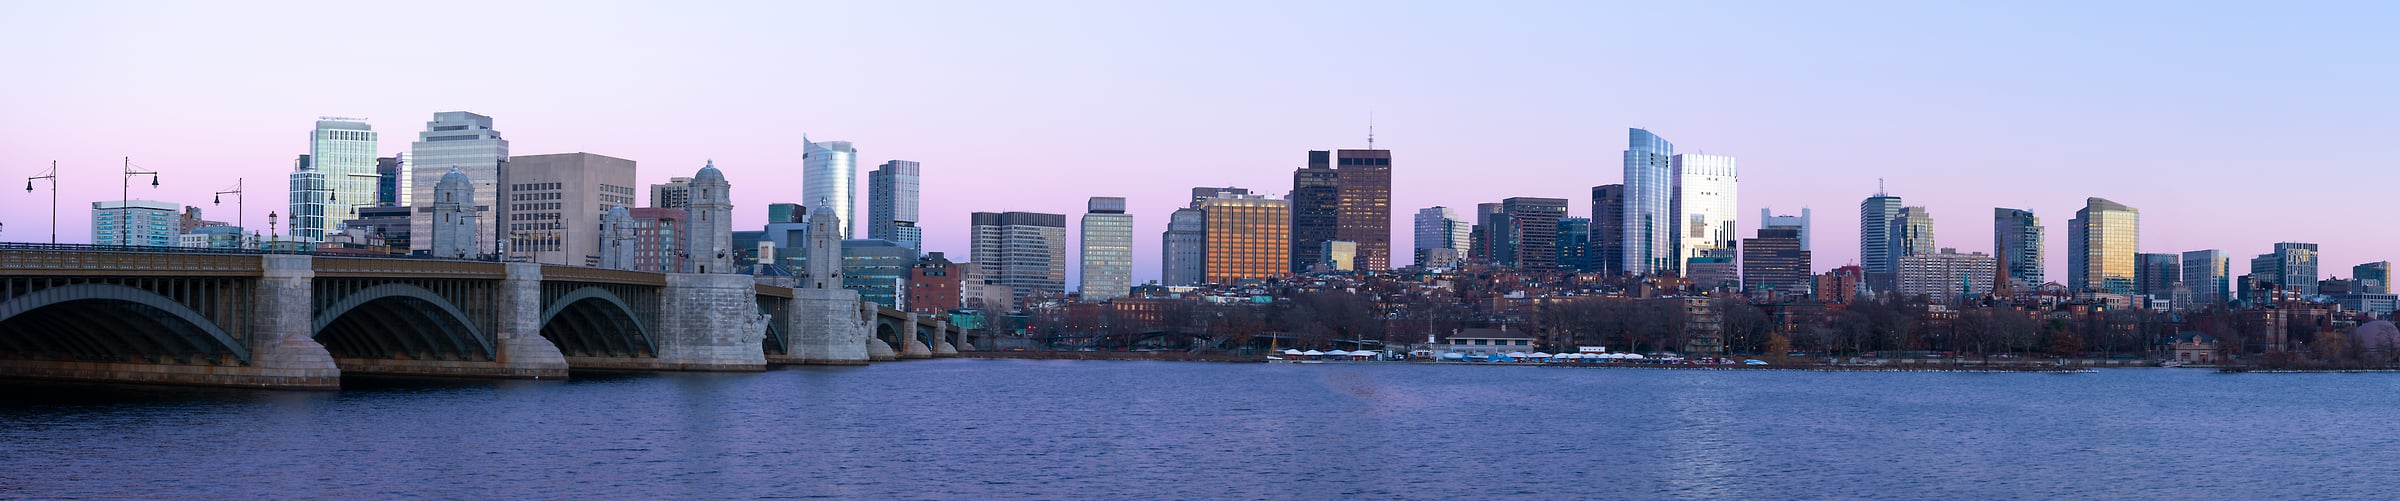 403 megapixels! A very high resolution panorama photo of the Boston skyline and the Charles River; panorama photograph created by Greg Probst in Boston, Massachusetts.